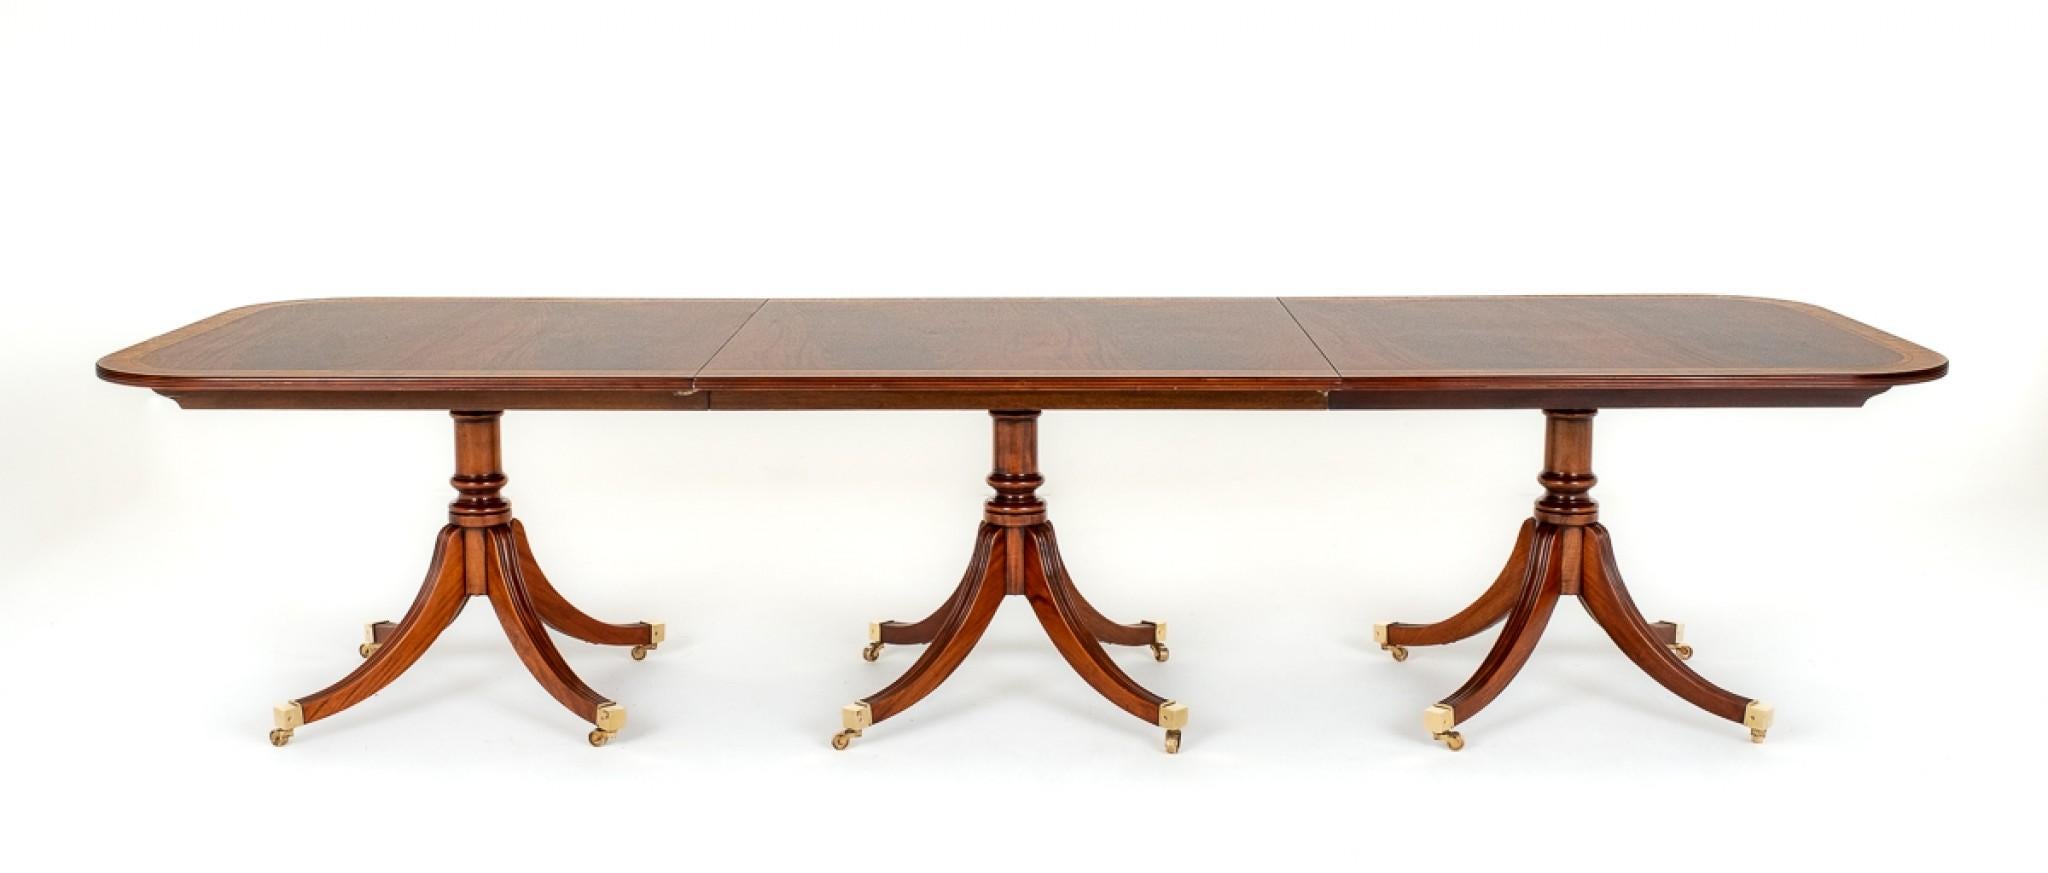 Stunning extending mahogany dining table in the Regency manner
Classic pedestal dining table with three four legged bases
When fully extended the table measures 16 feet - 497 inches
So very good size would seat 16-18 people
Alongside a dining